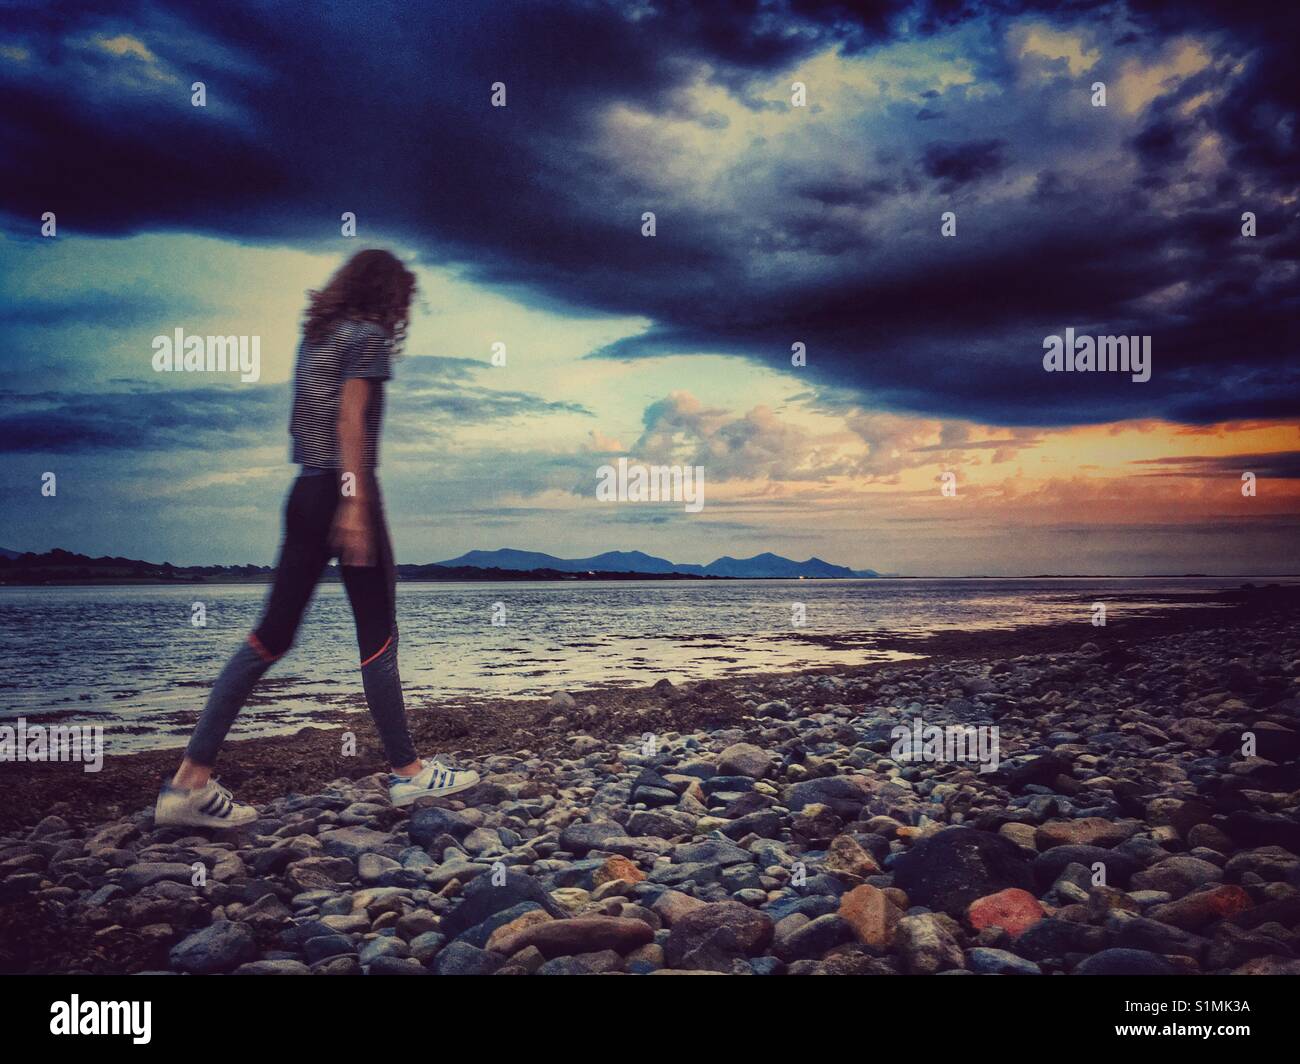 Young girl walking on pebble beach at sunset Stock Photo